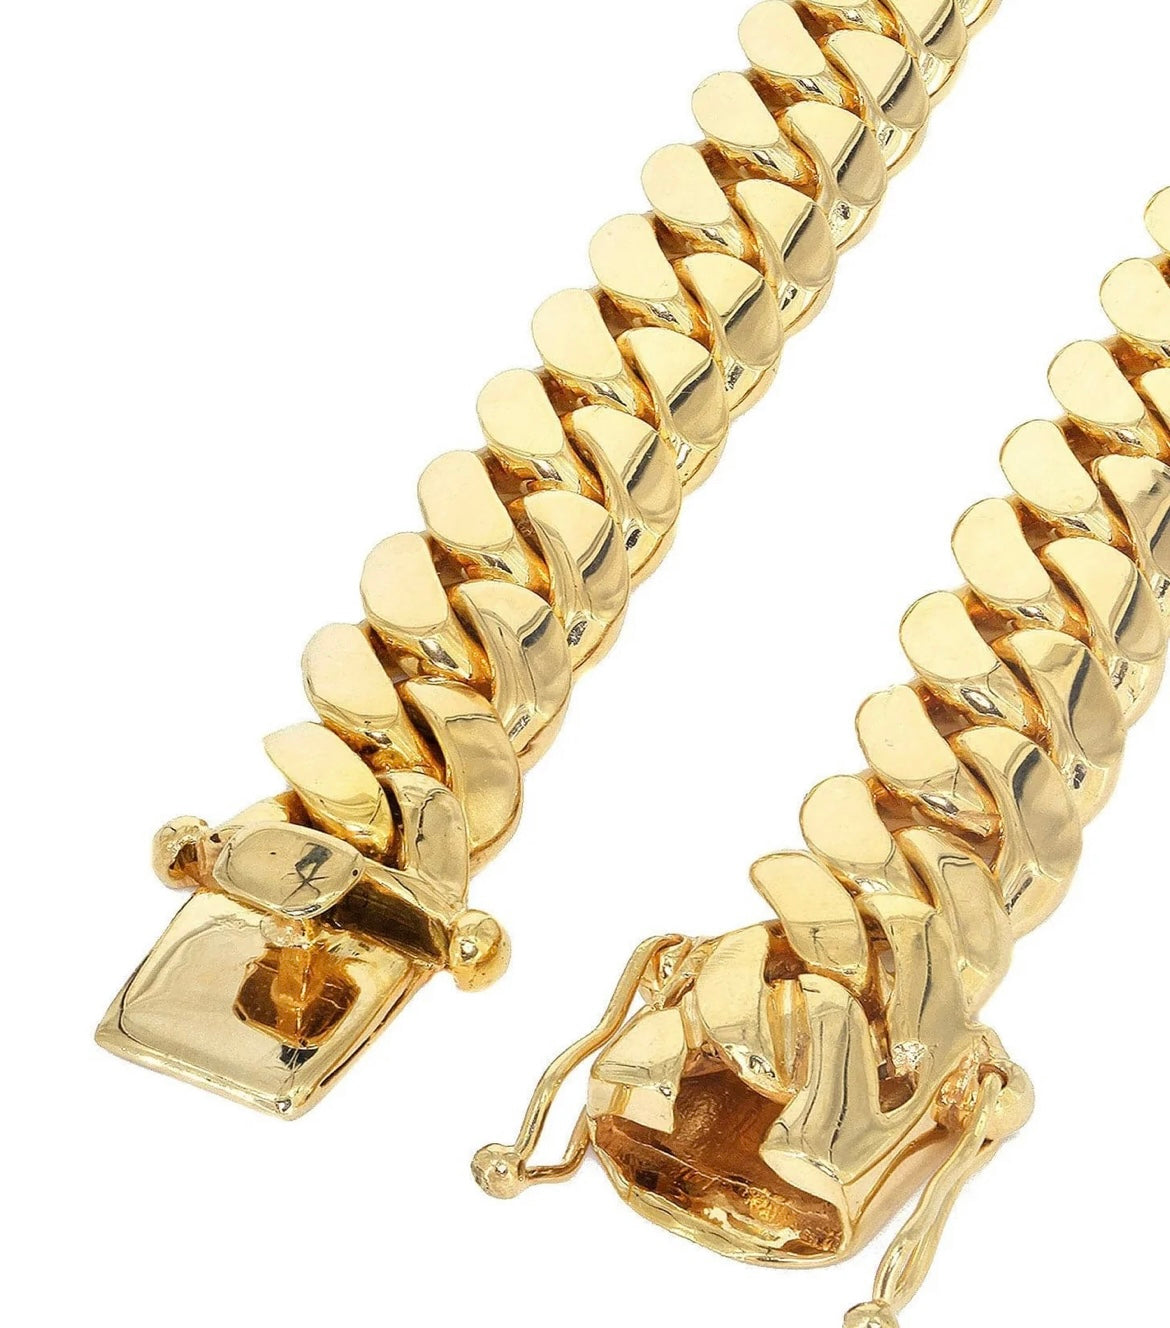 Miami Cuban Chain 15mm wide 22” long 10K yellow gold 237 grams   Comes in any length and any Karat.